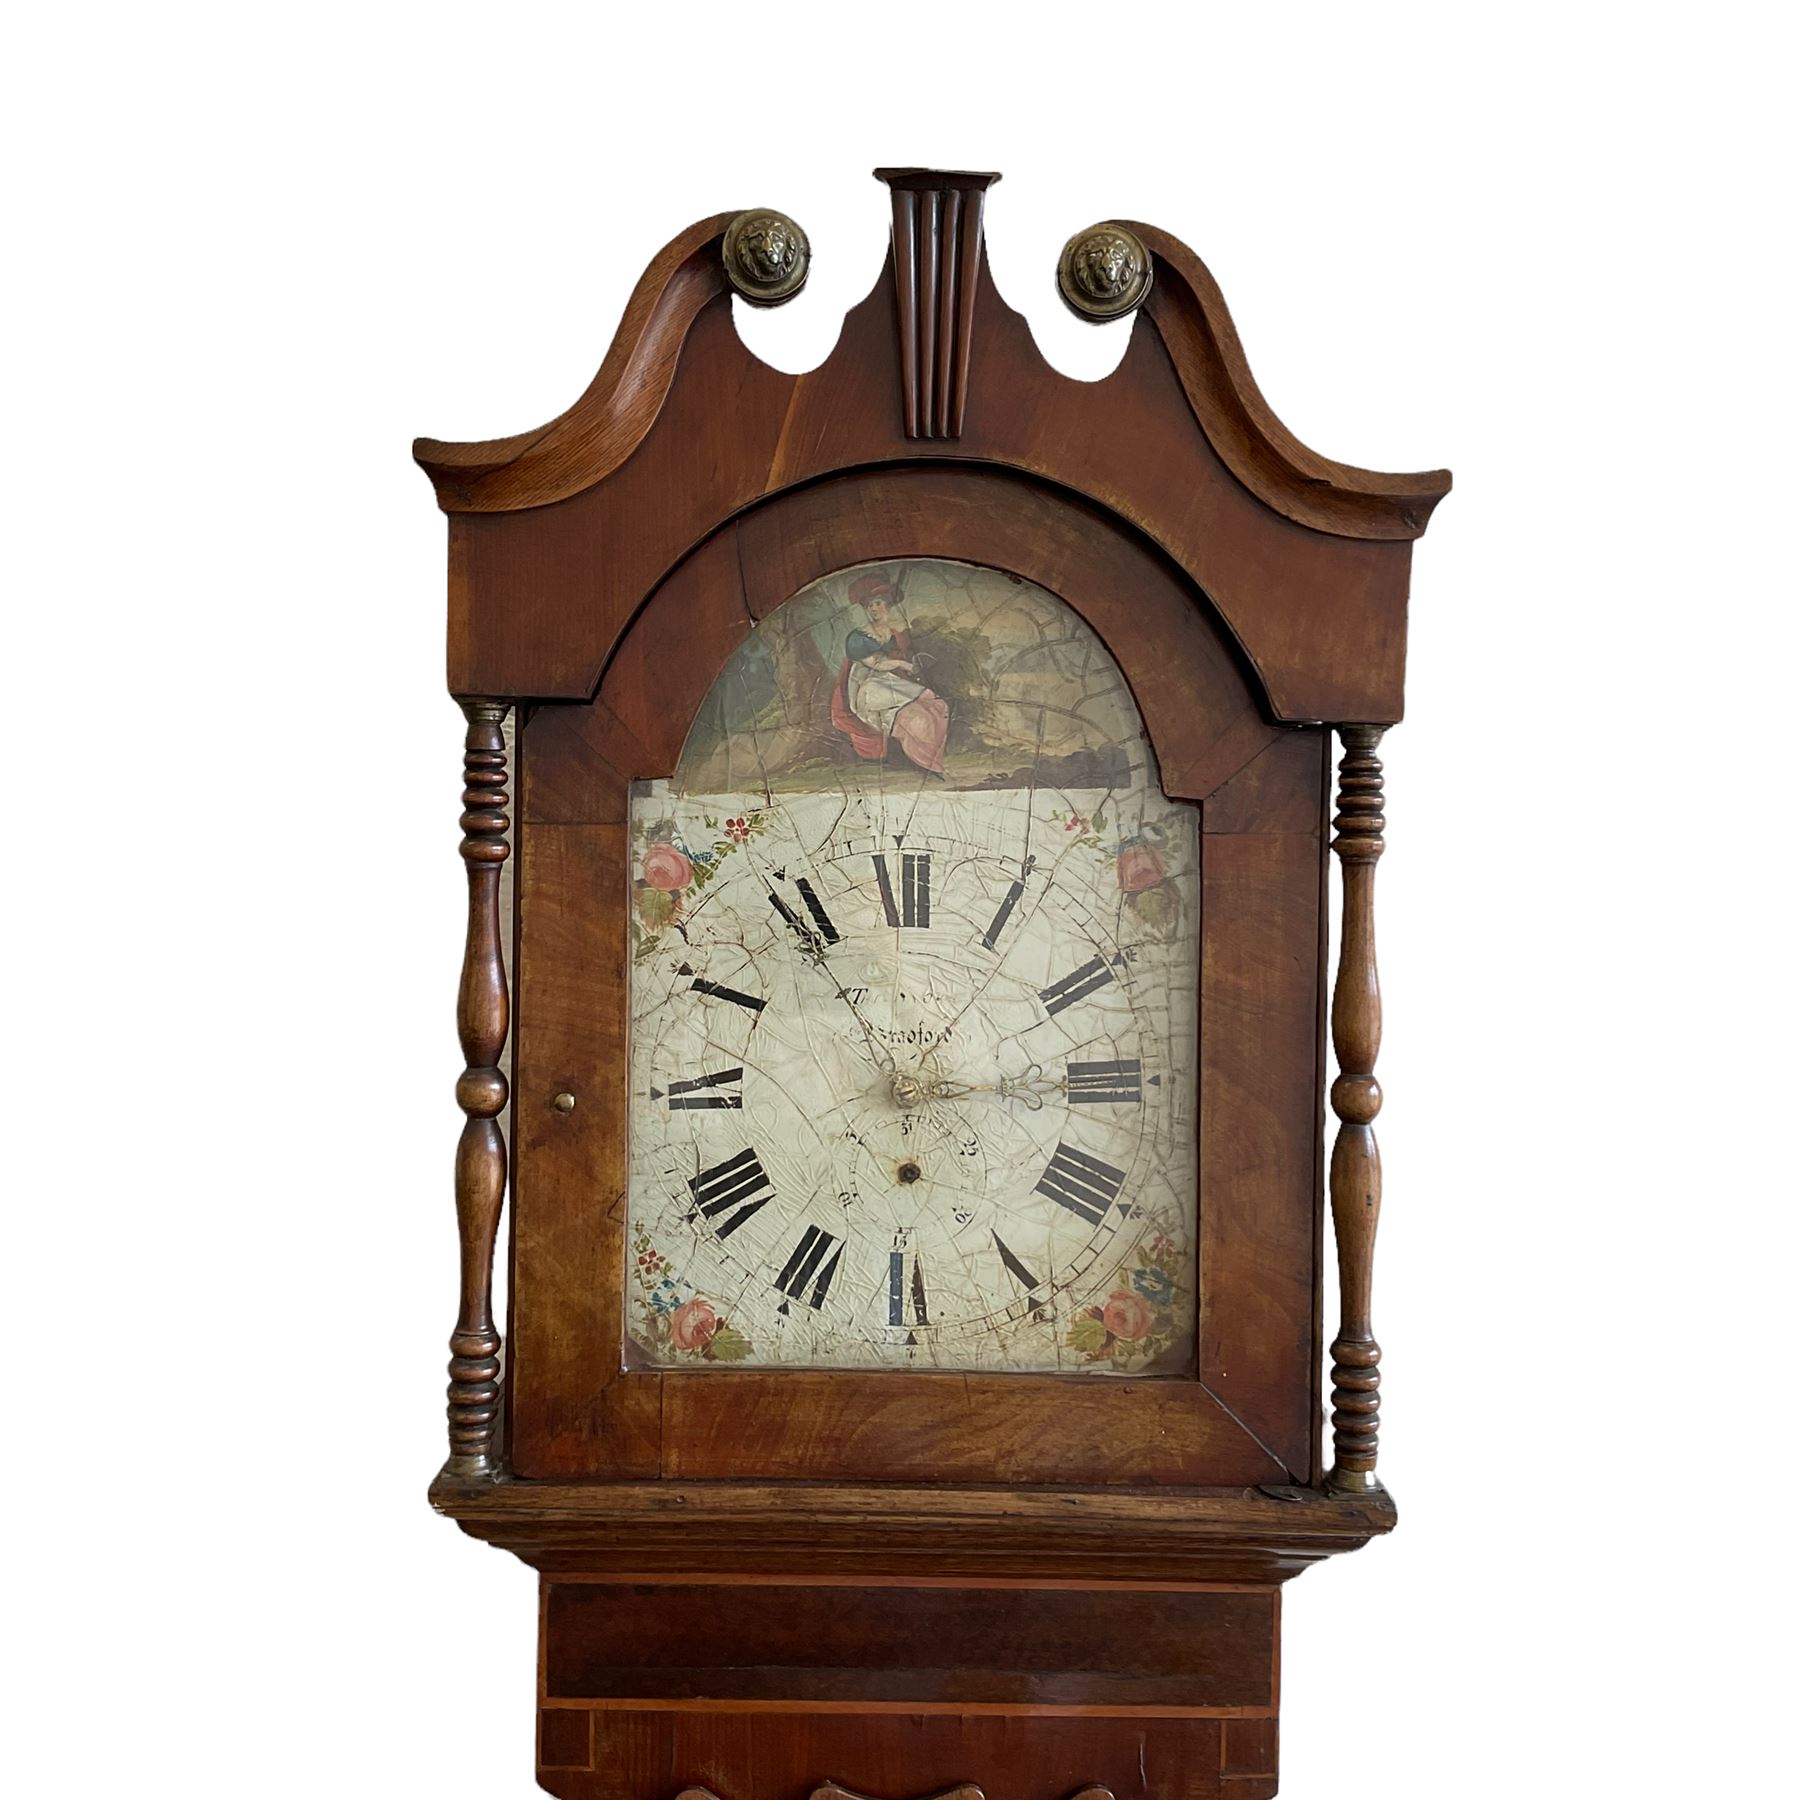 A mid-19th century 30 hour longcase clock in an oak and mahogany case with an inset maple panel and - Image 3 of 4